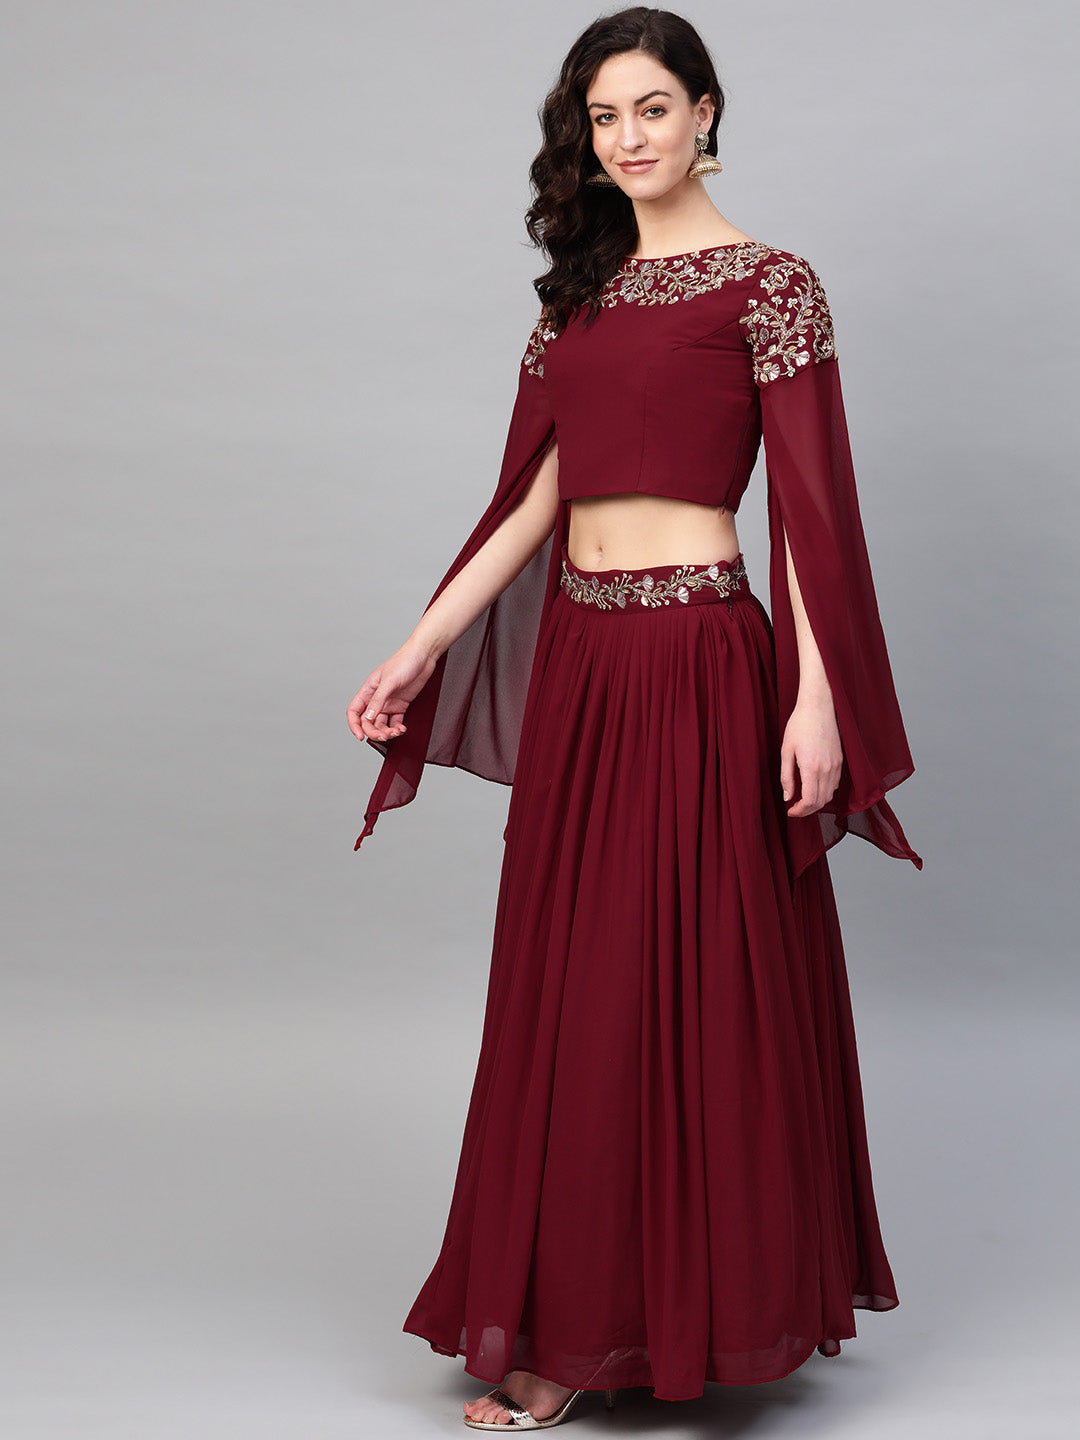 Latest 50 Crop Top and Lehenga Designs (2022) - Tips and Beauty | Cape  lehenga, Lehenga designs, Organza lehenga